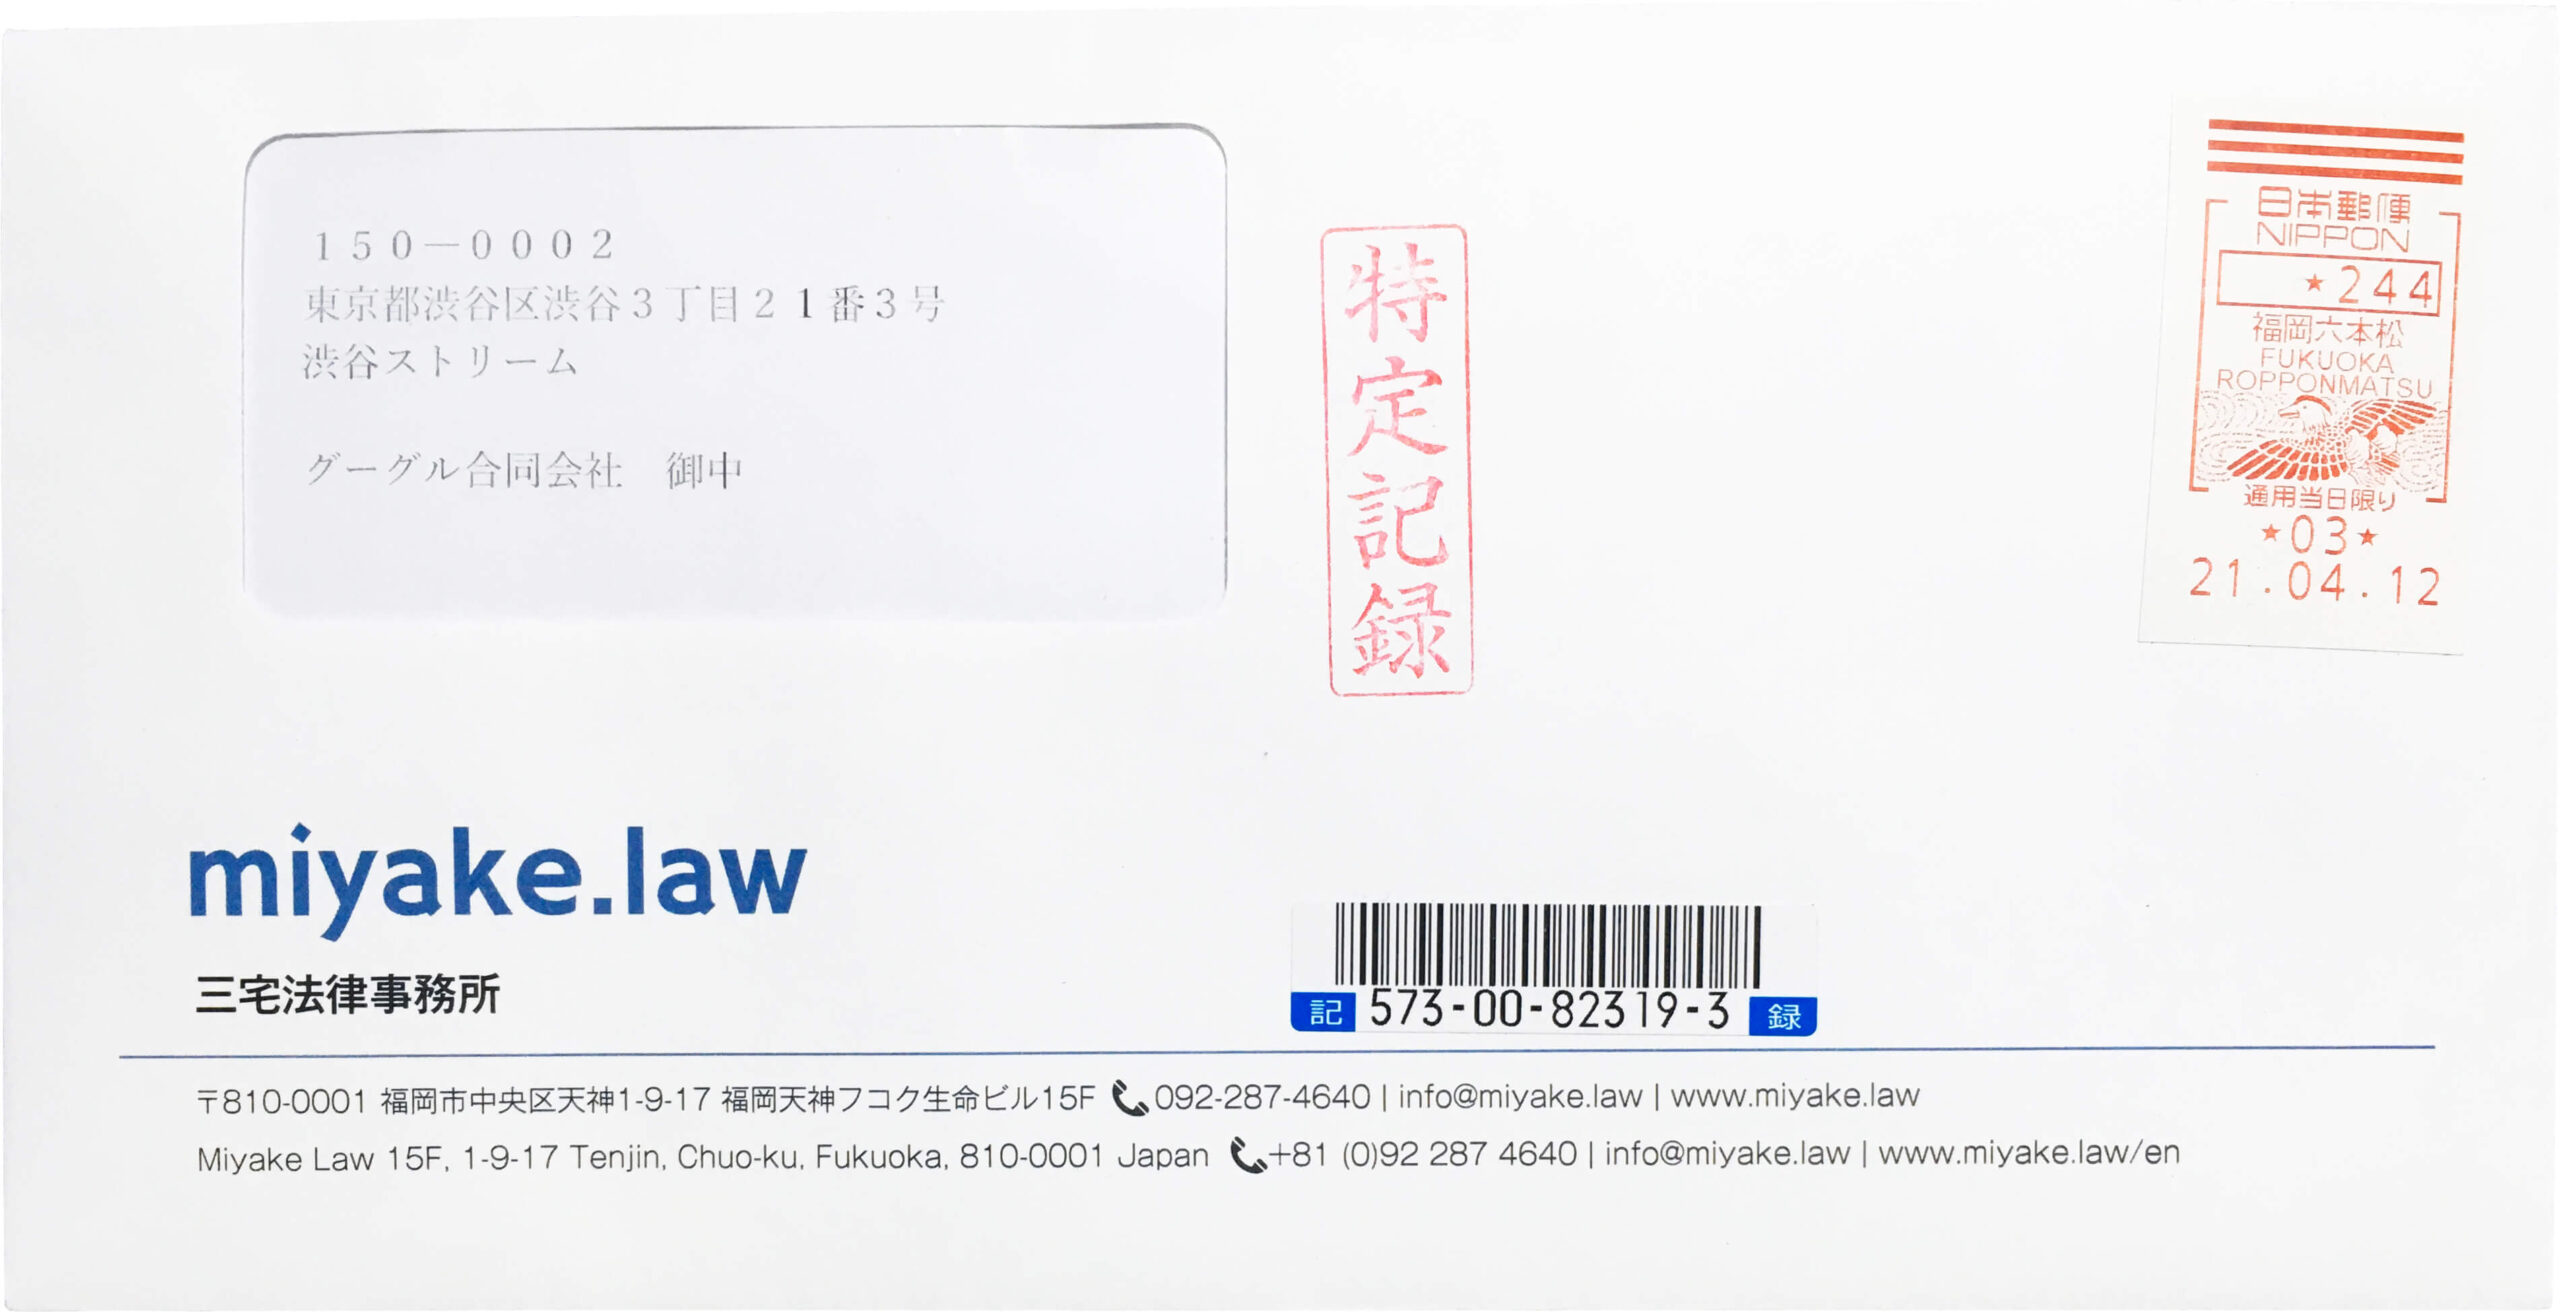 A demand letter for debt collection in Japan